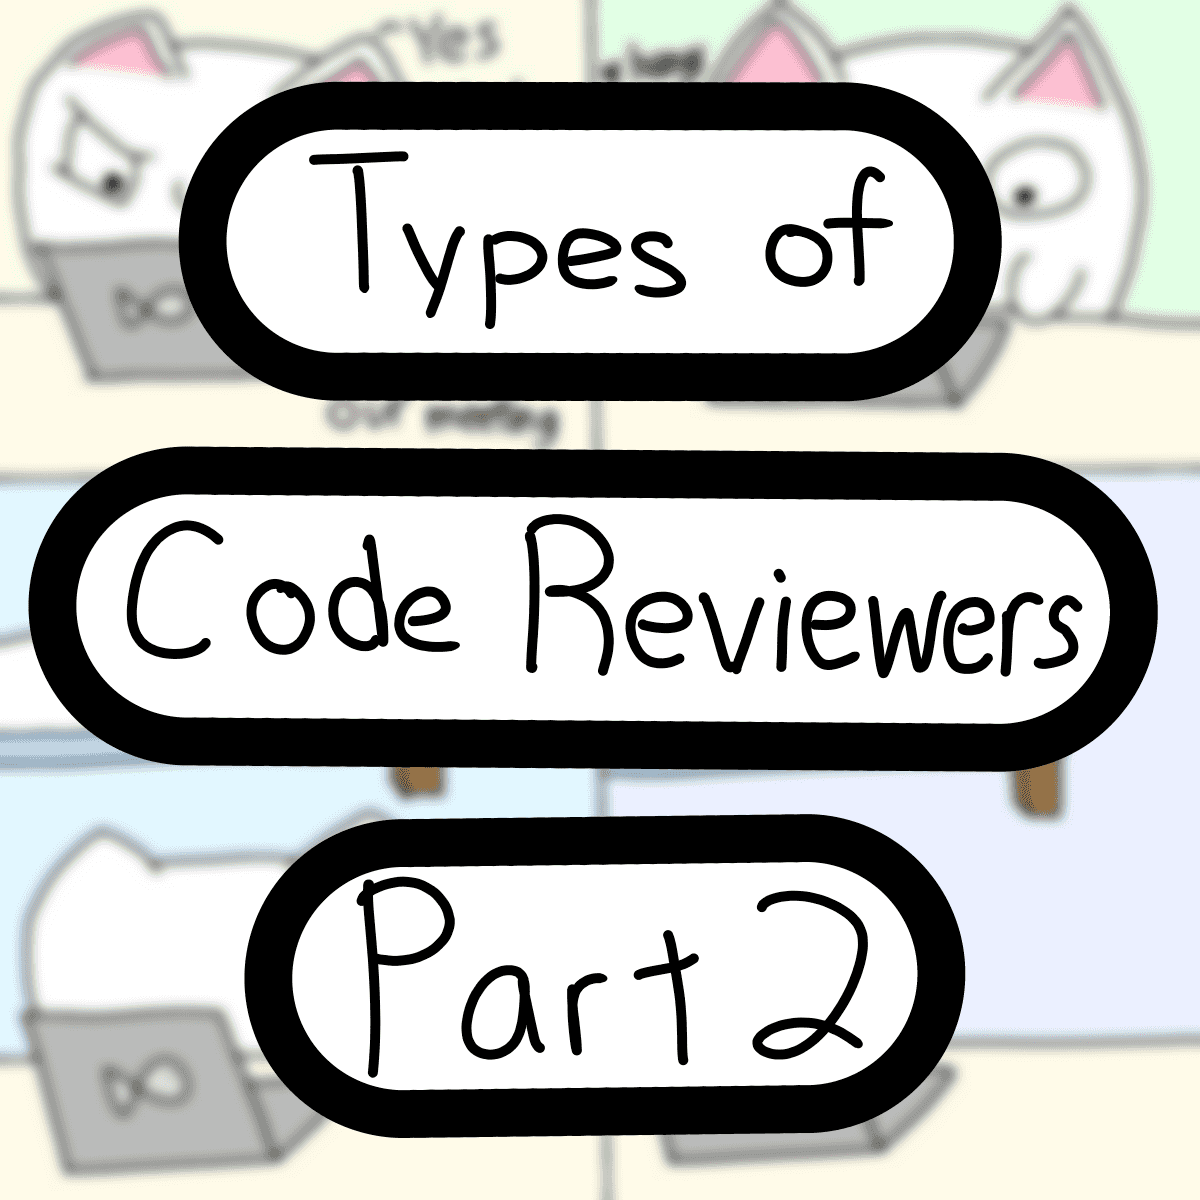 Image for /types-of-code-reviewers-2/